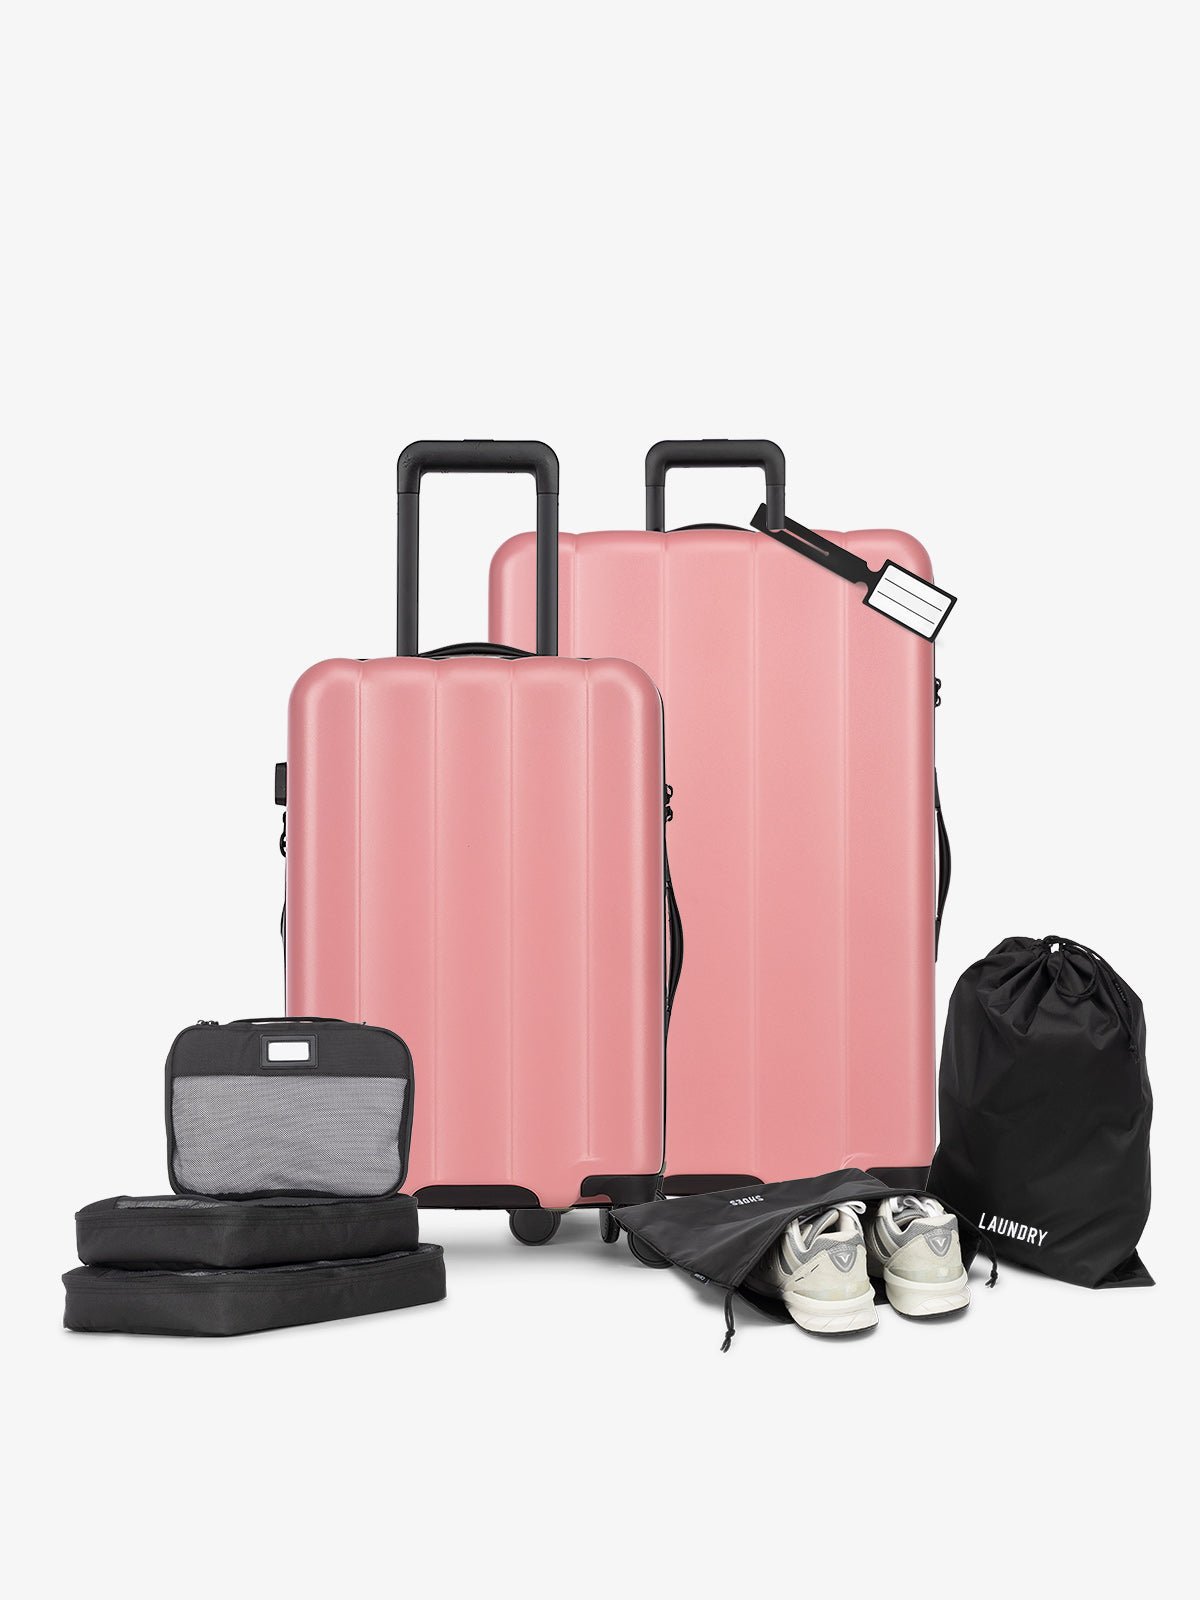 CALPAK Starter Luggage Set with Carry-On, Large Luggage, Packing Cubes, Pouches and Luggage tag in pink